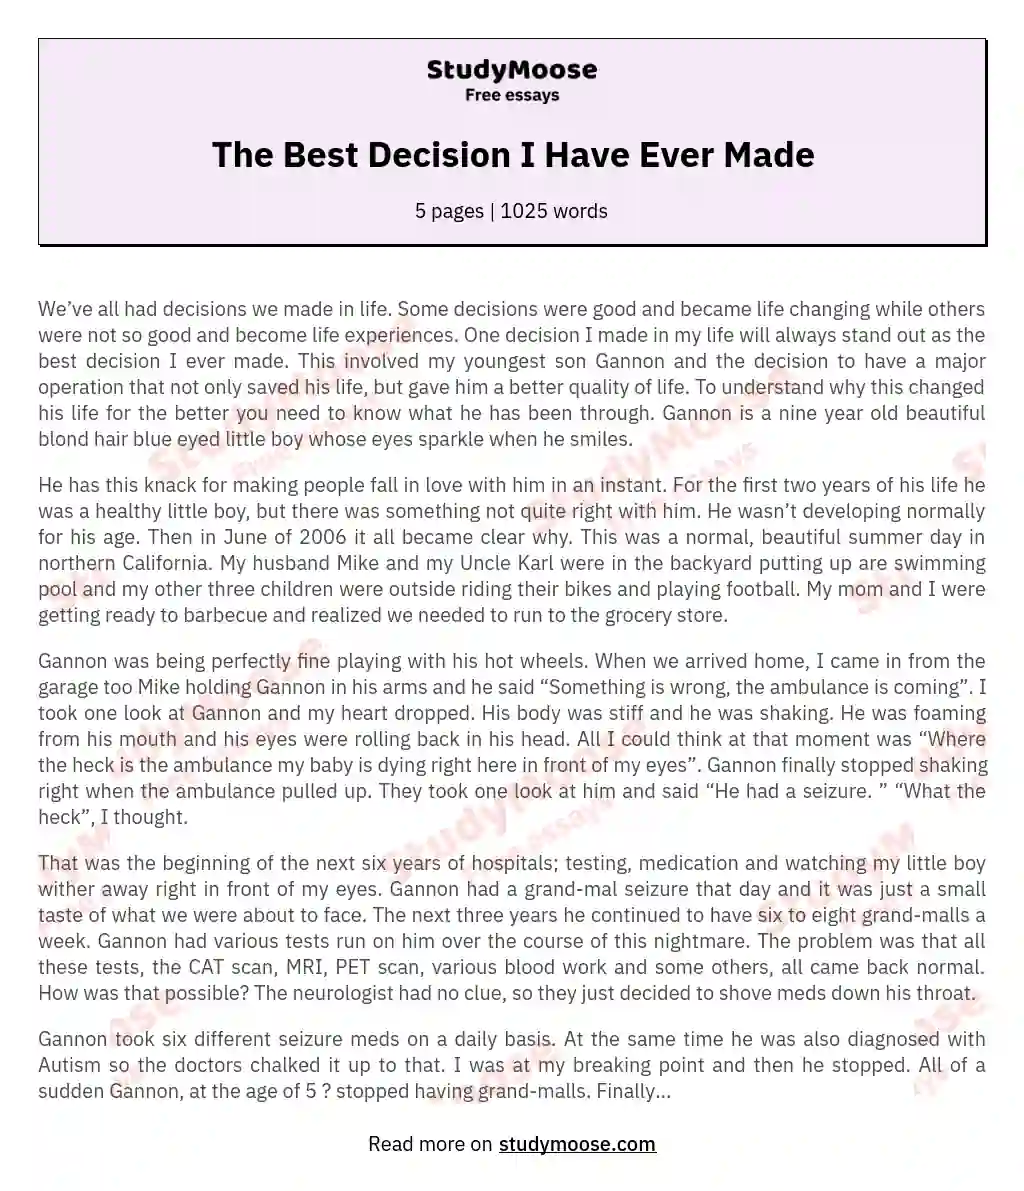 The Best Decision I Have Ever Made essay